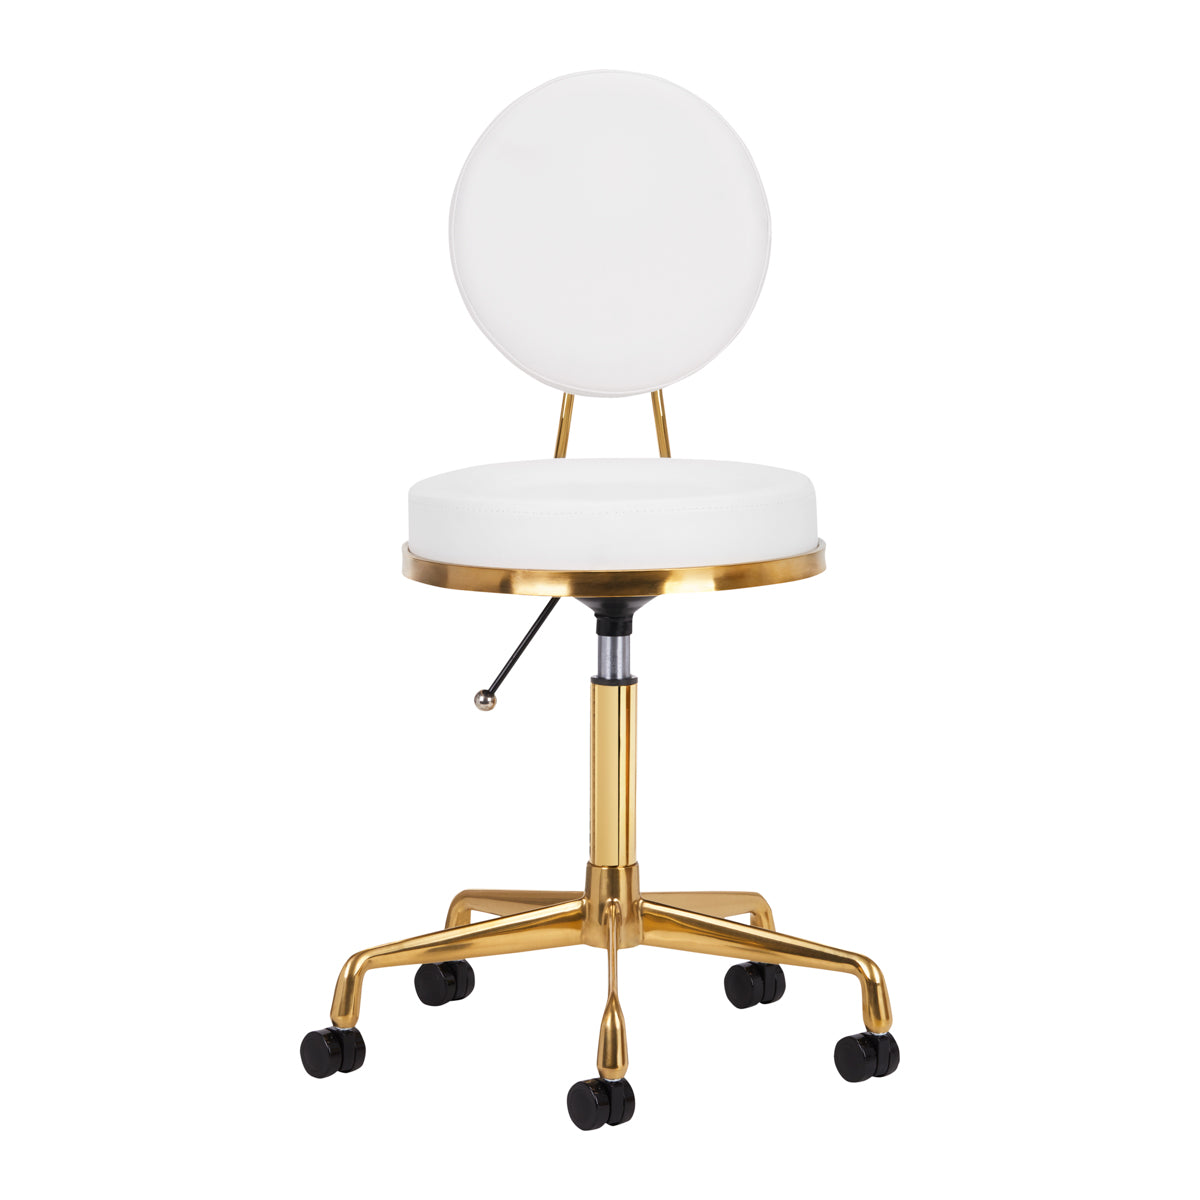 COSMETIC STOOL H5 WHITE GOLD